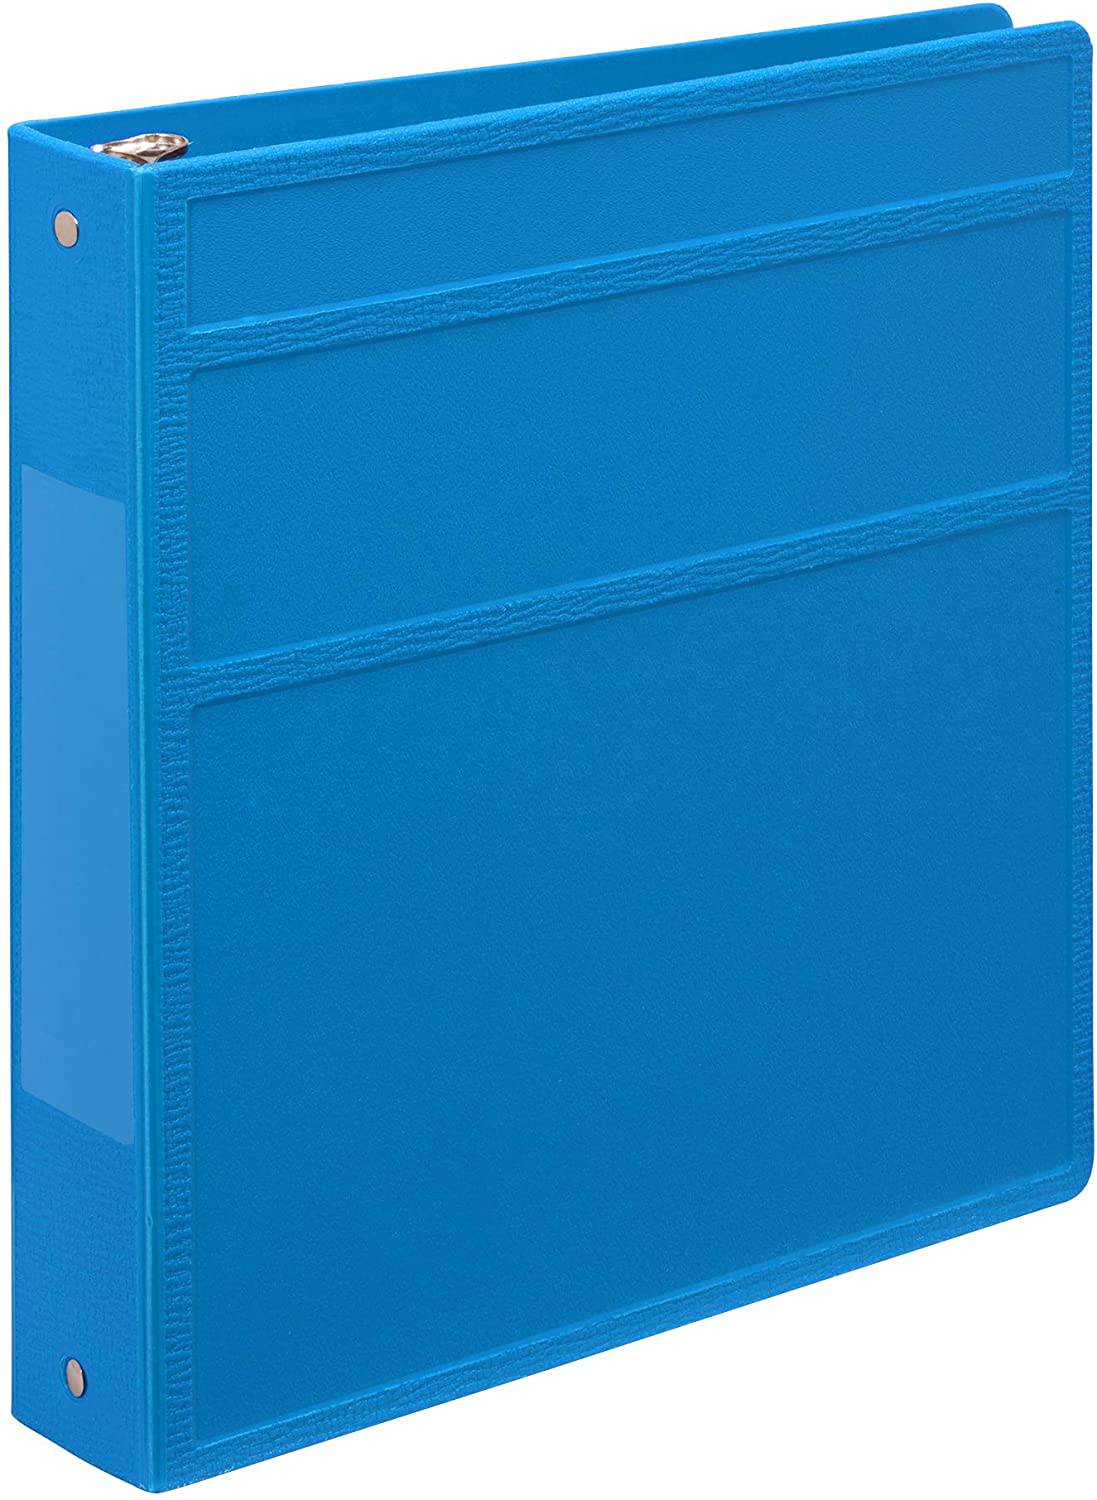 Carstens 1.5- Inch Heavy Duty 3-Ring Binder - Side Opening, Pool Blue